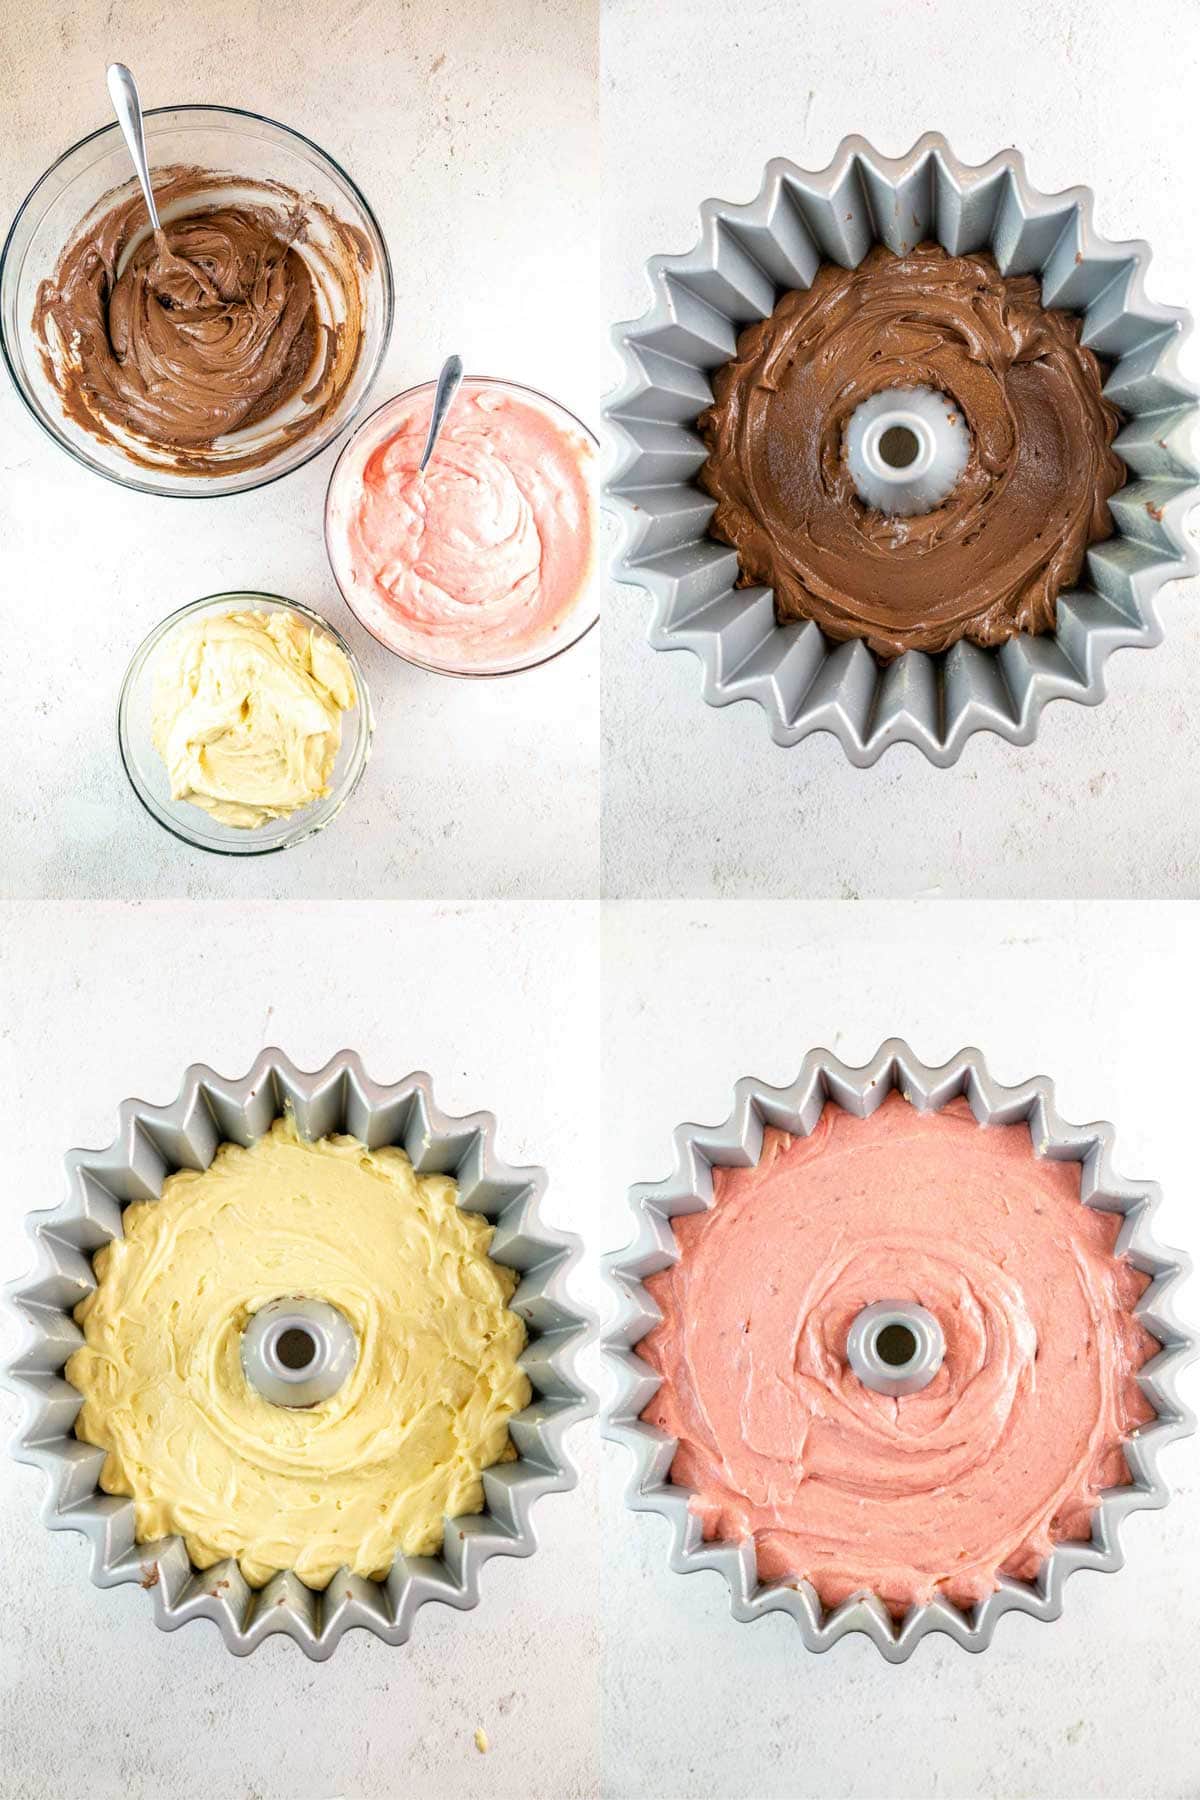 Side by side photos of the step by step assembly of a Neapolitan bundt cake. 